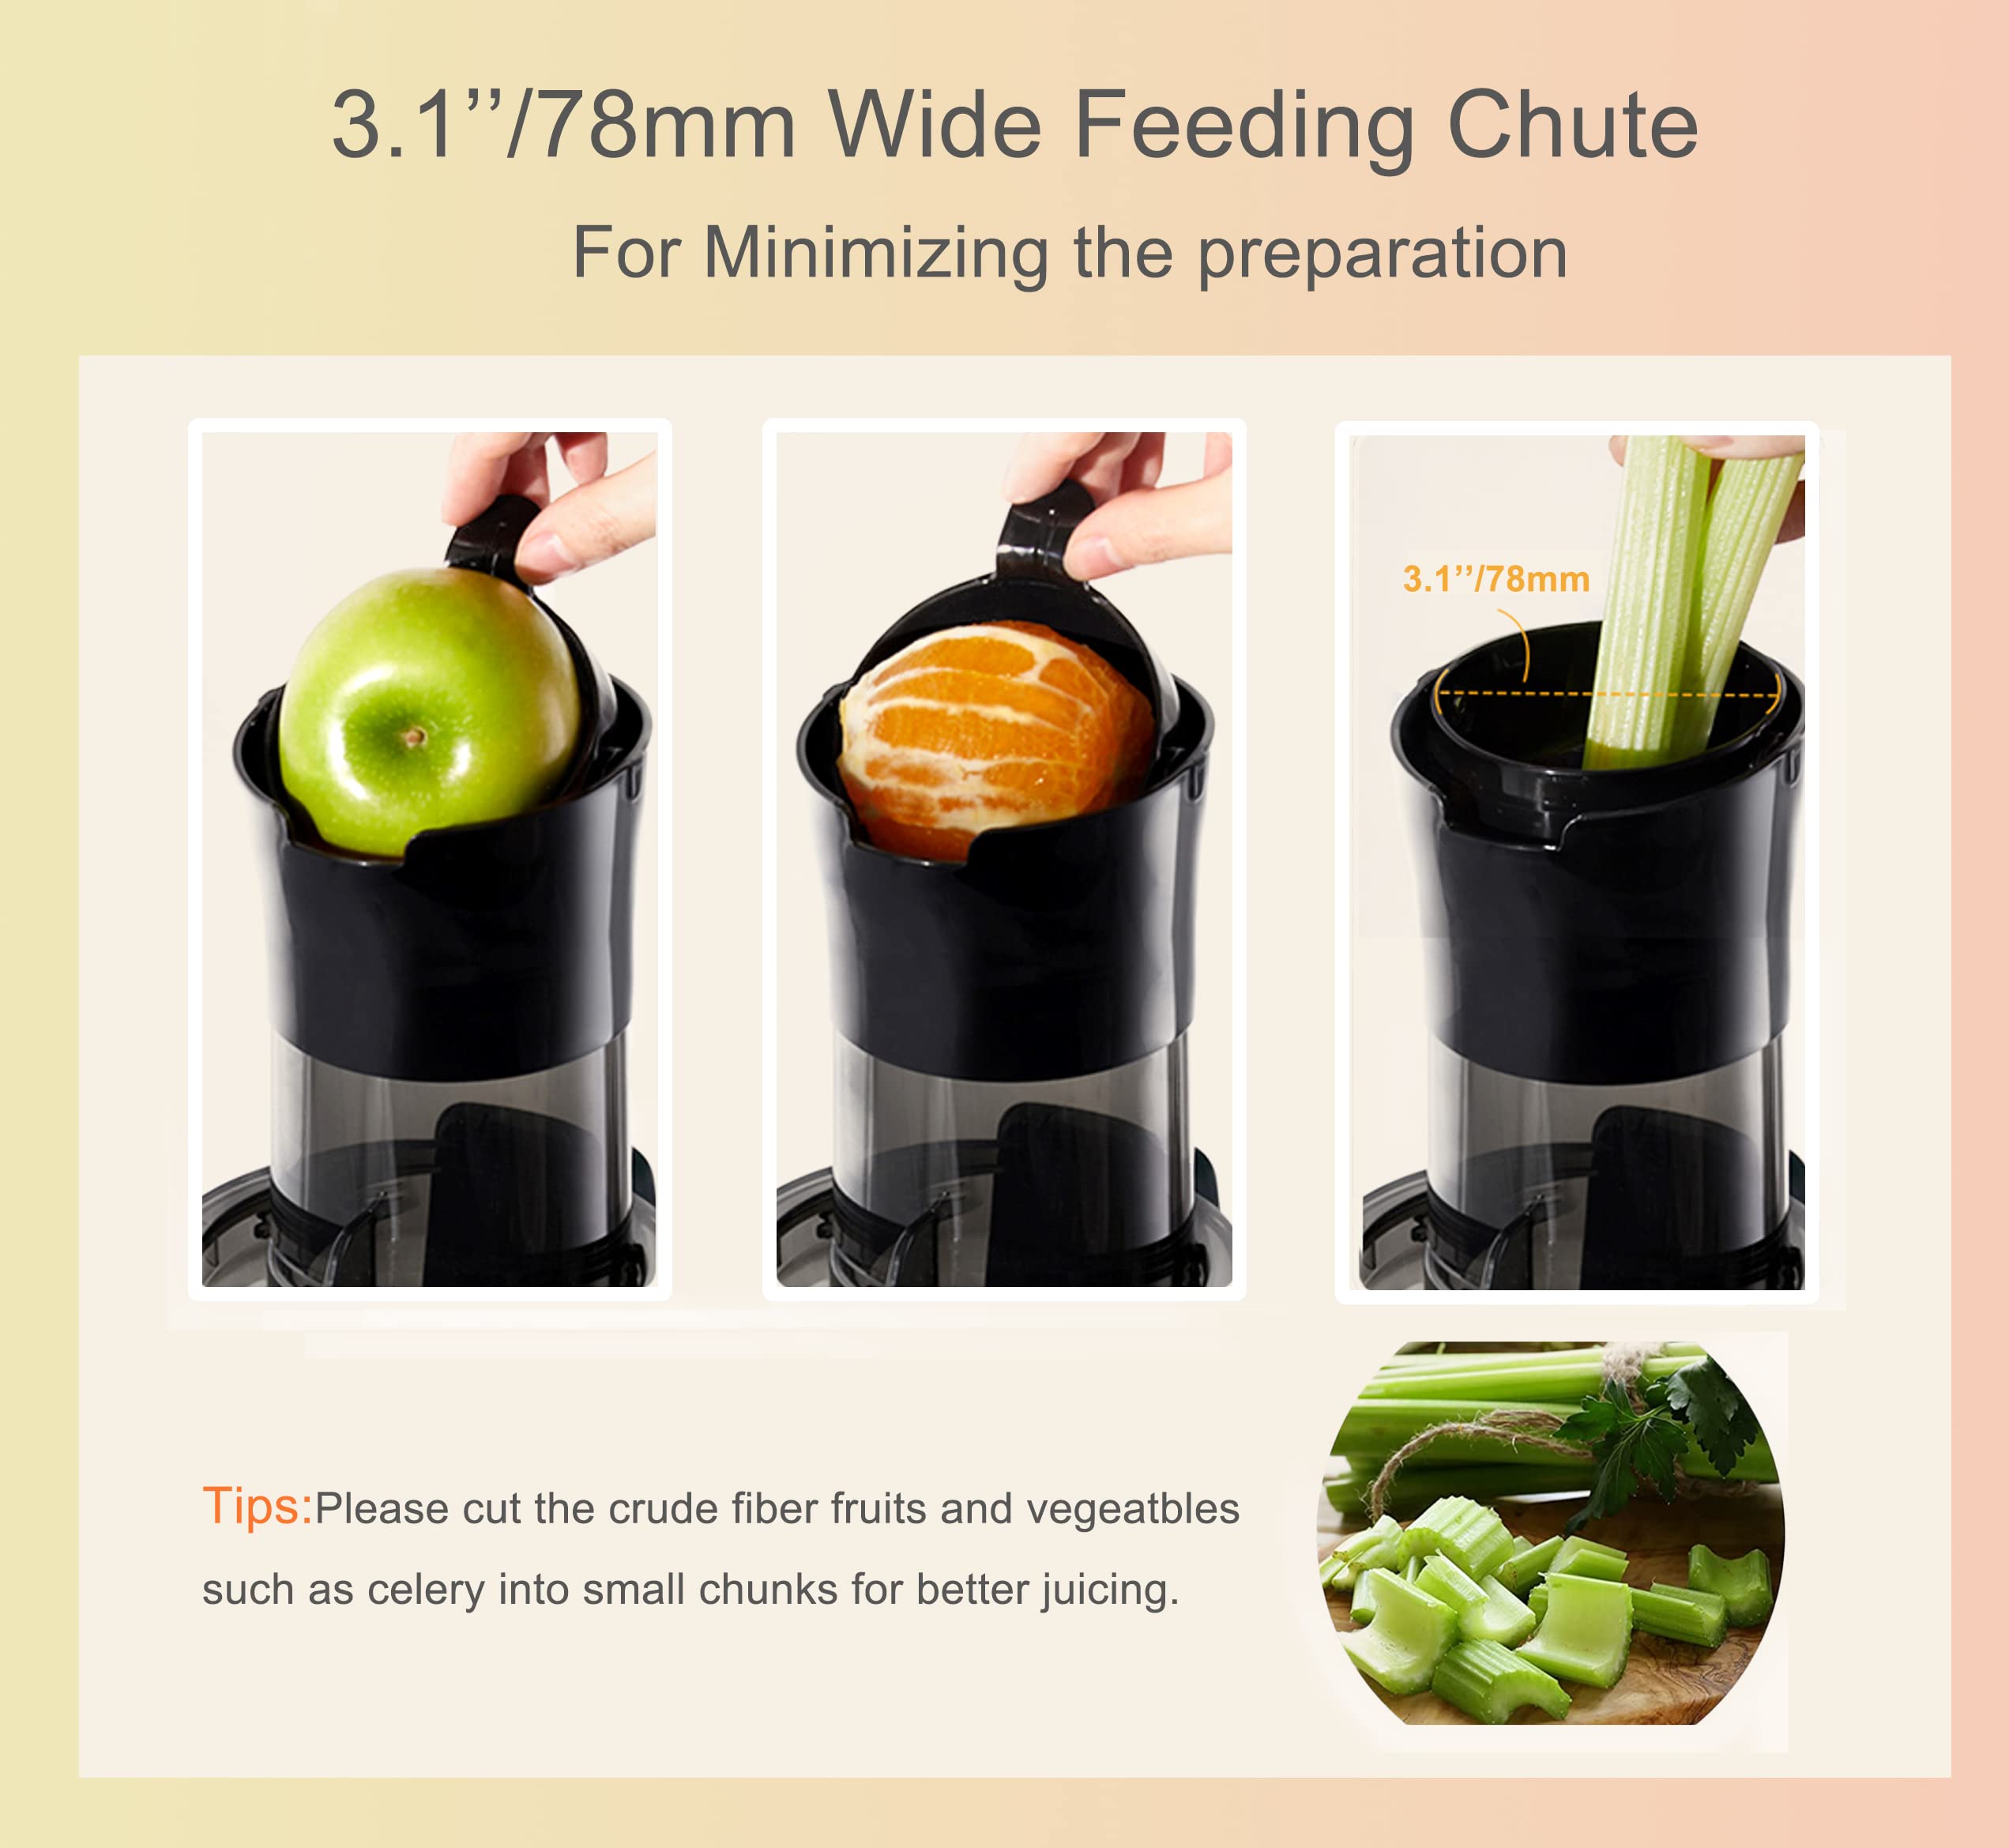 Qvin Compact Slow Masticating Juicer machines 3inch Large Feed Chute, Easy to Clean, BPA Free, 200W Nutritional electrical Cold Press Juicer machine vegetable and fruit,Deluxe Silver-gray